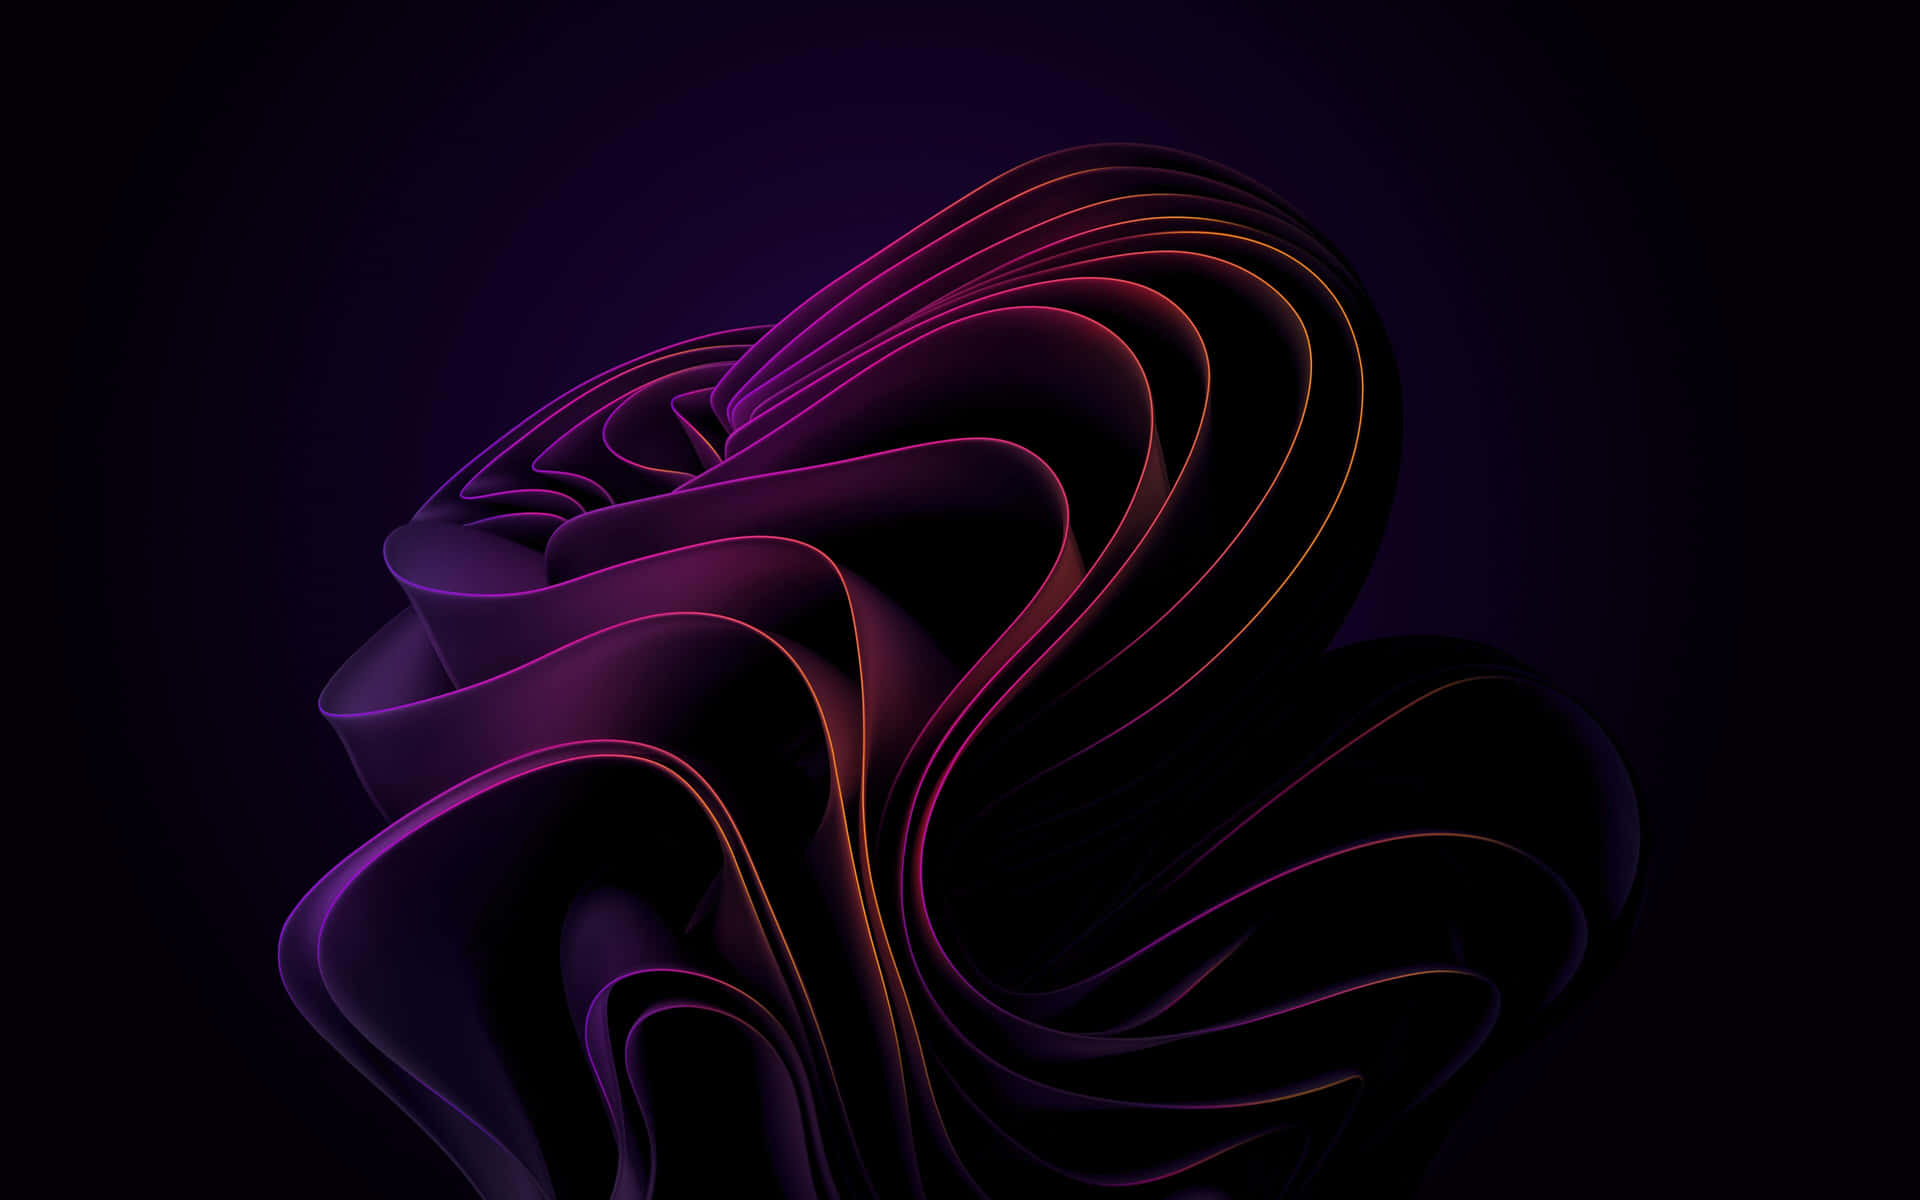 Abstract Abstract Wavy Lines On A Dark Background